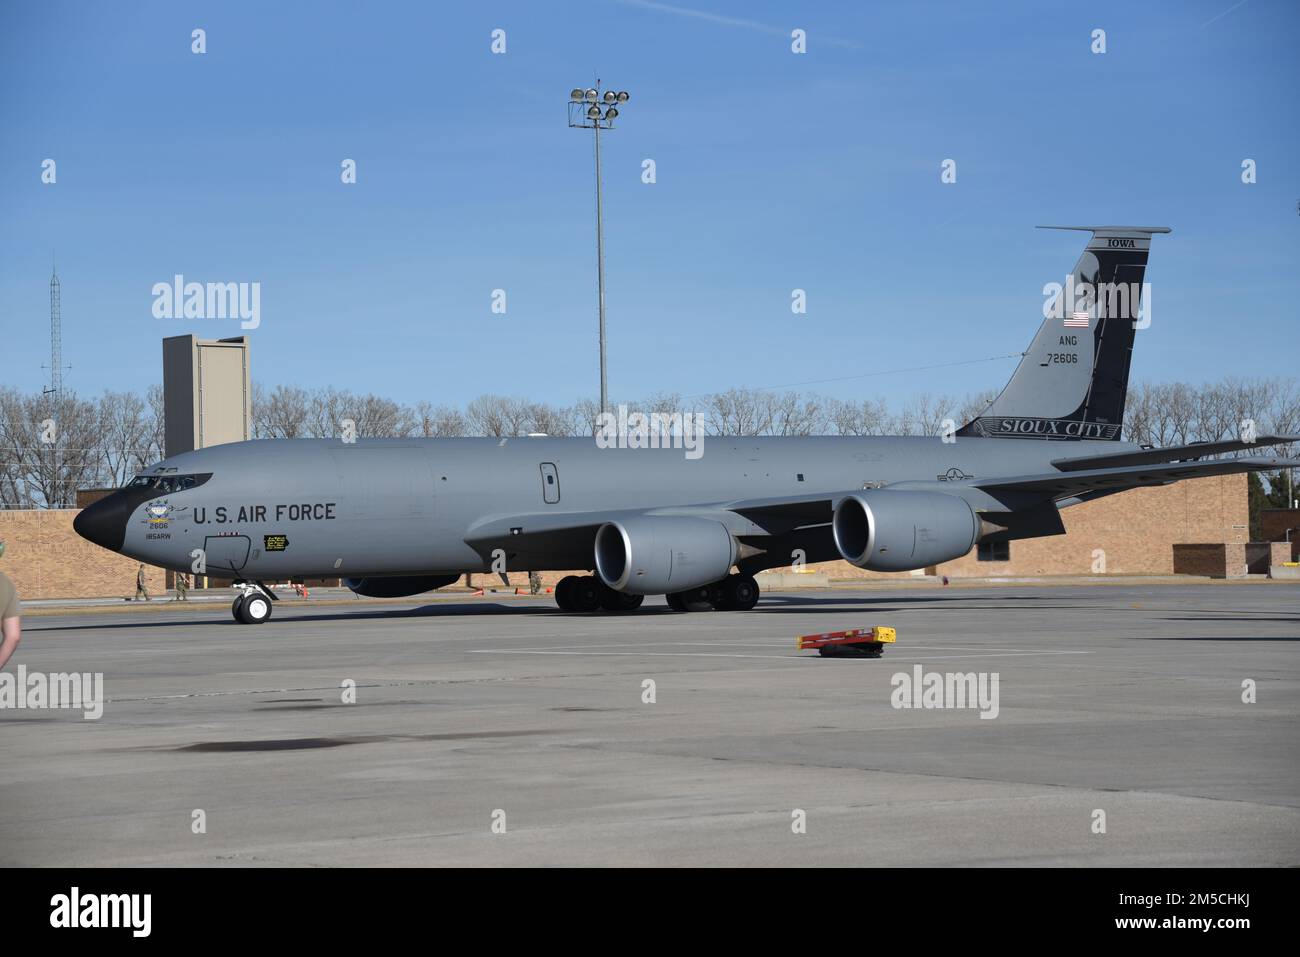 A U.S. Air Force KC-135 with 75th anniversary markings, including a large bat tail flash, tail number 57-2606 from the Iowa Air National Guard taxis on the ramp at the 185th Air Refueling Wing in Sioux City, Iowa on March 1, 2022. The aircraft is due to be decommission and sent to the Aerospace Maintenance and Regeneration Group or AMARG at Davis-Monthon Air Force Base.  U.S. Air National Guard photo Senior Master Sgt. Vincent De Groot 185th ARW Wing PA Stock Photo